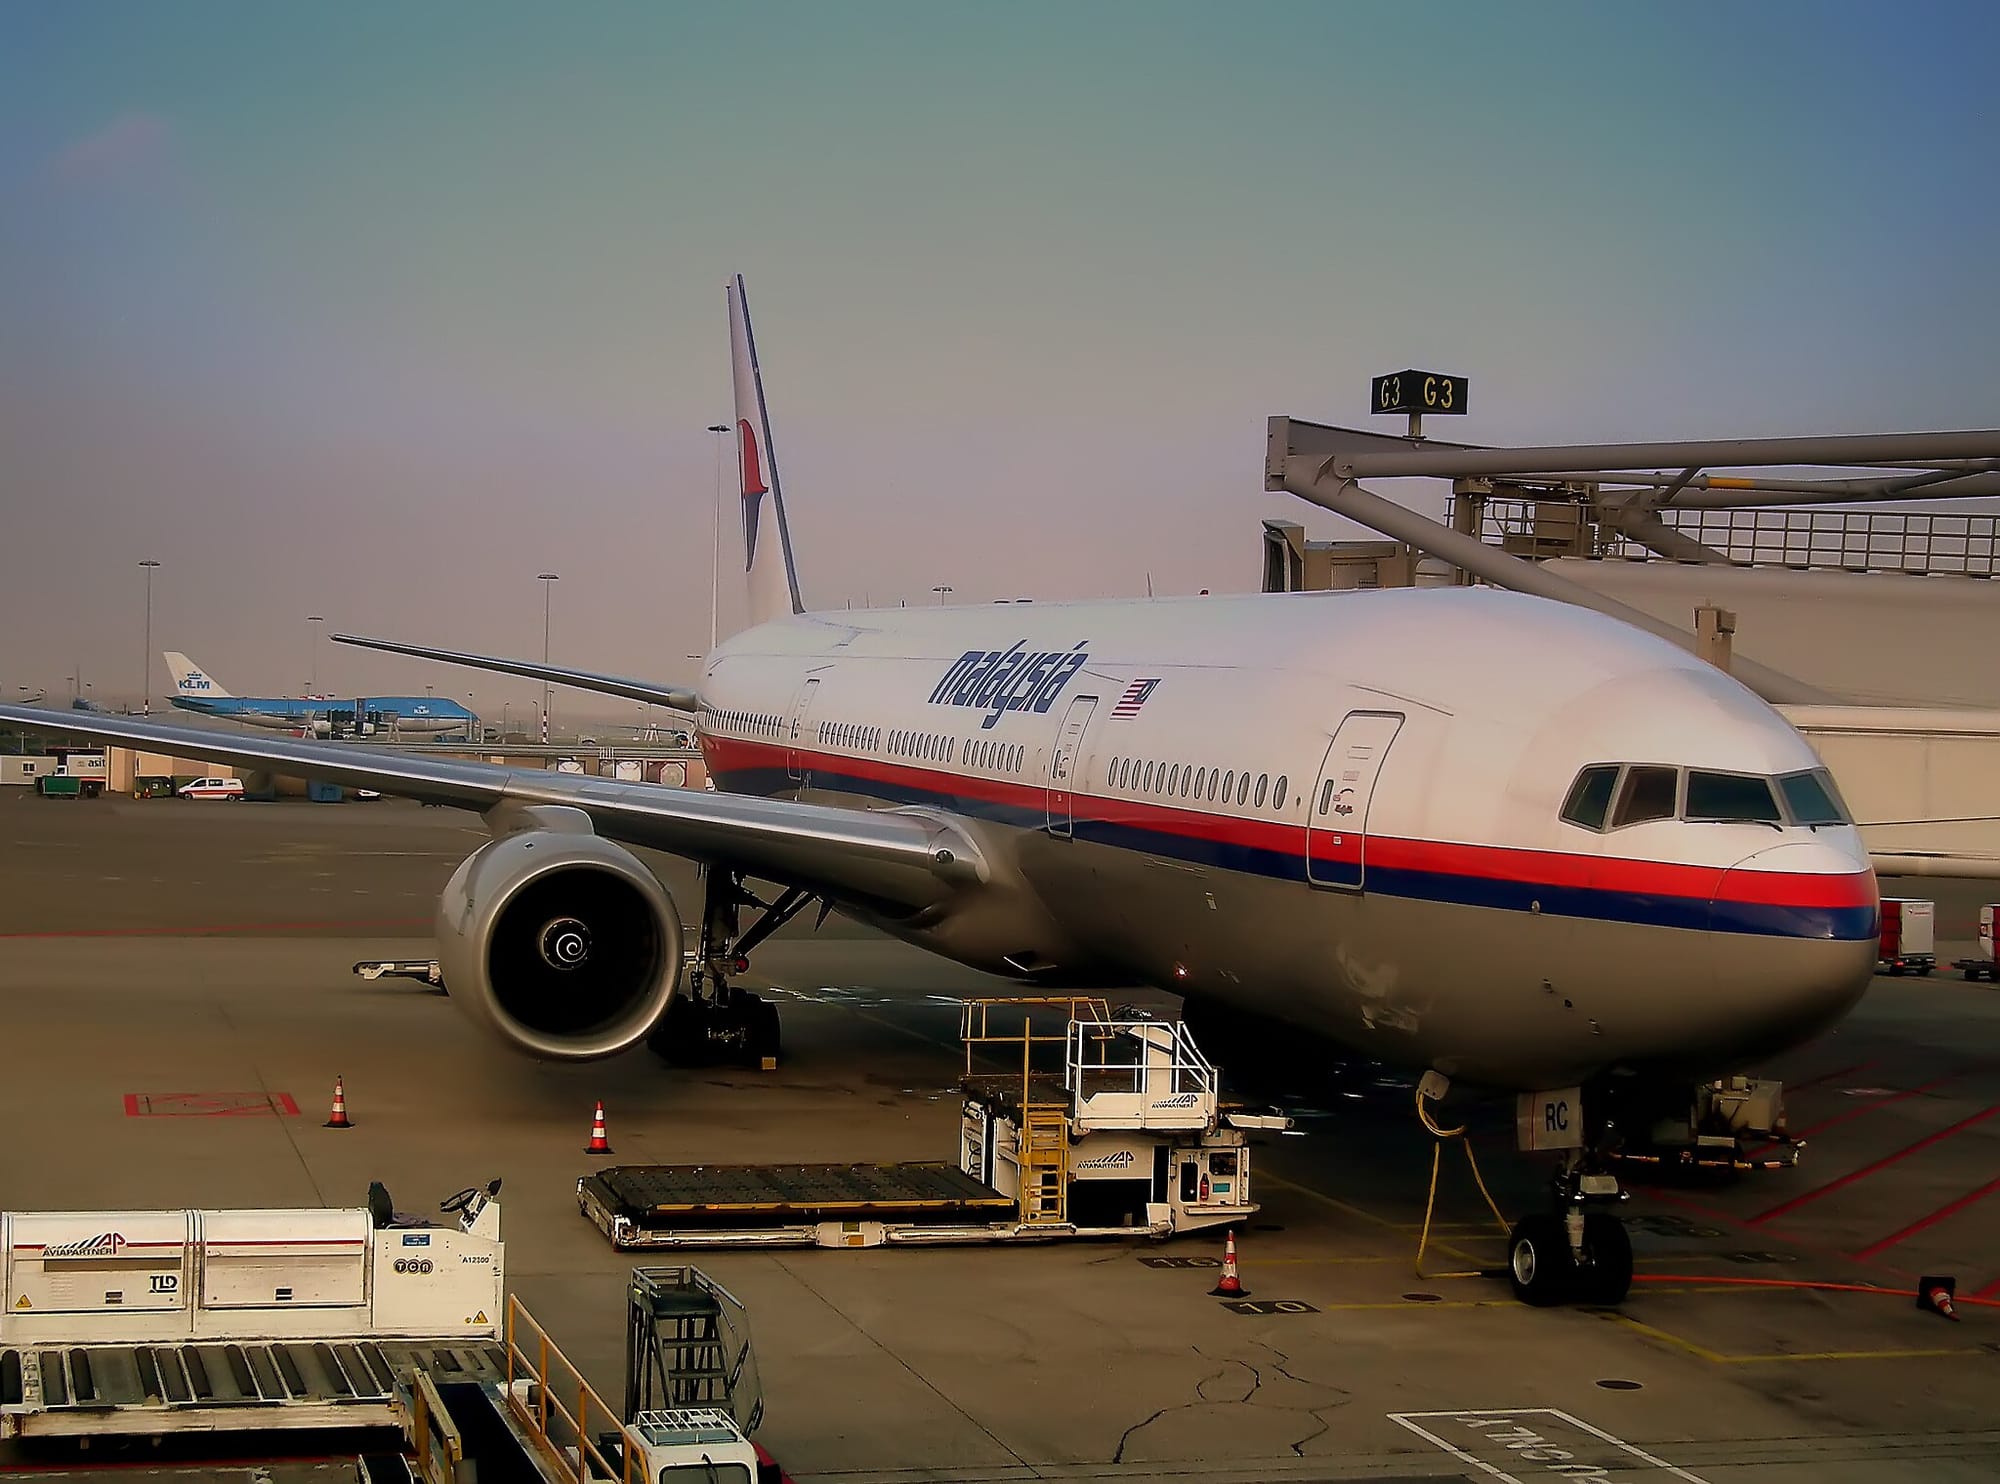 Ten Years Later: MH370 - A Wound in the Fabric of Aviation